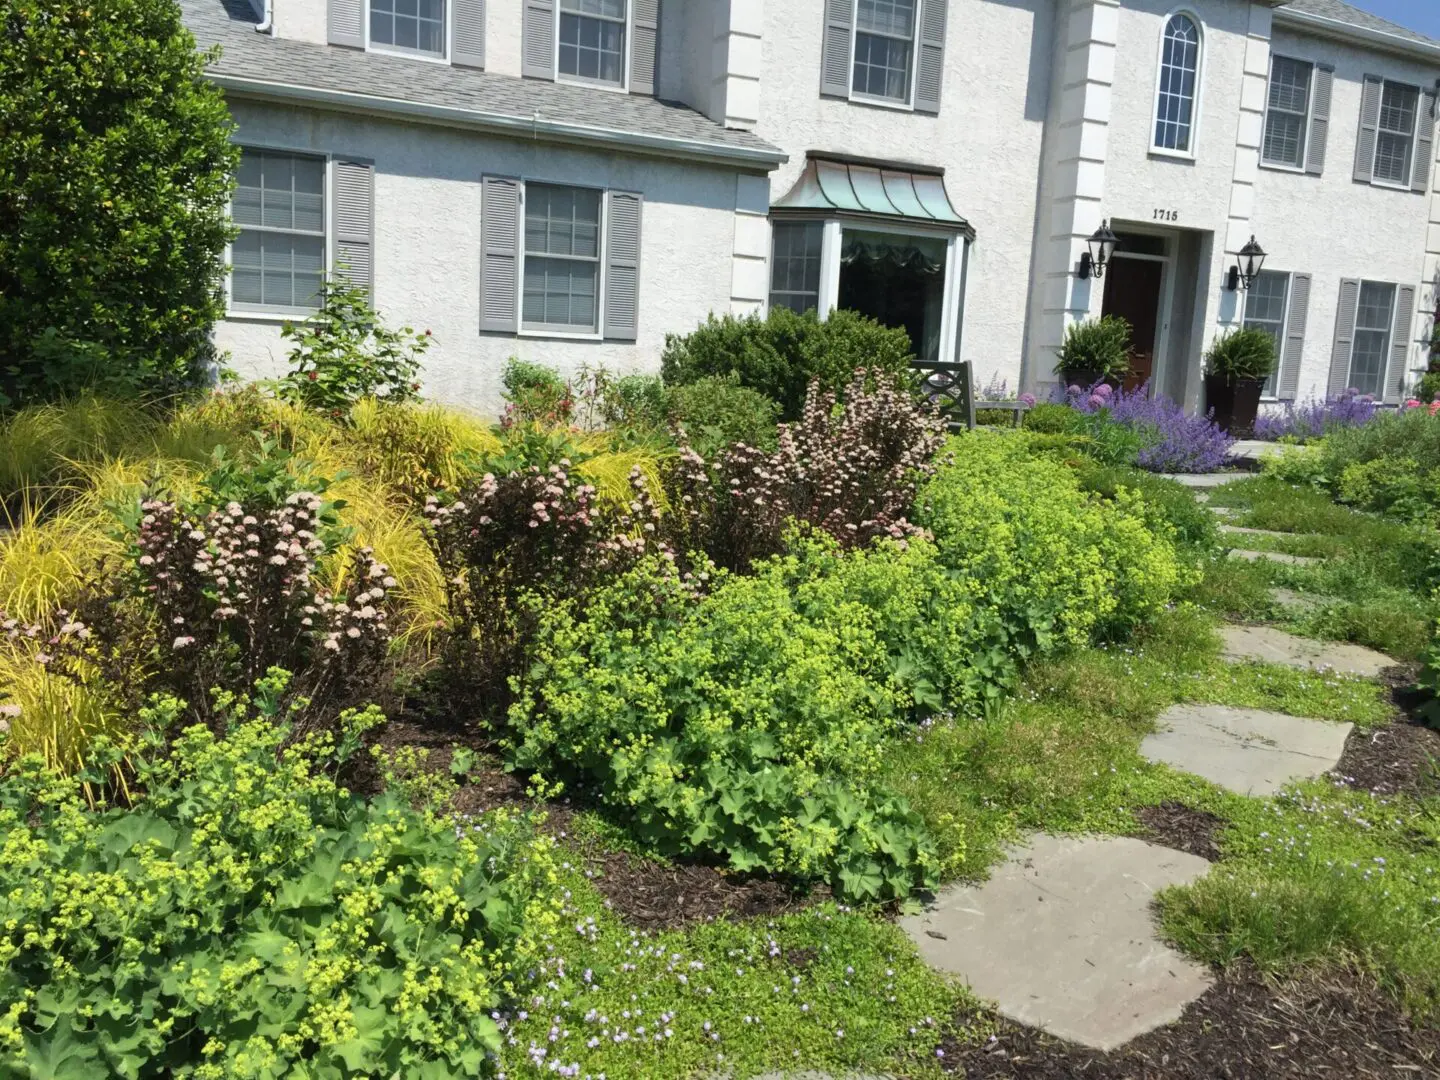 Flagstones along with bushes in front of a house